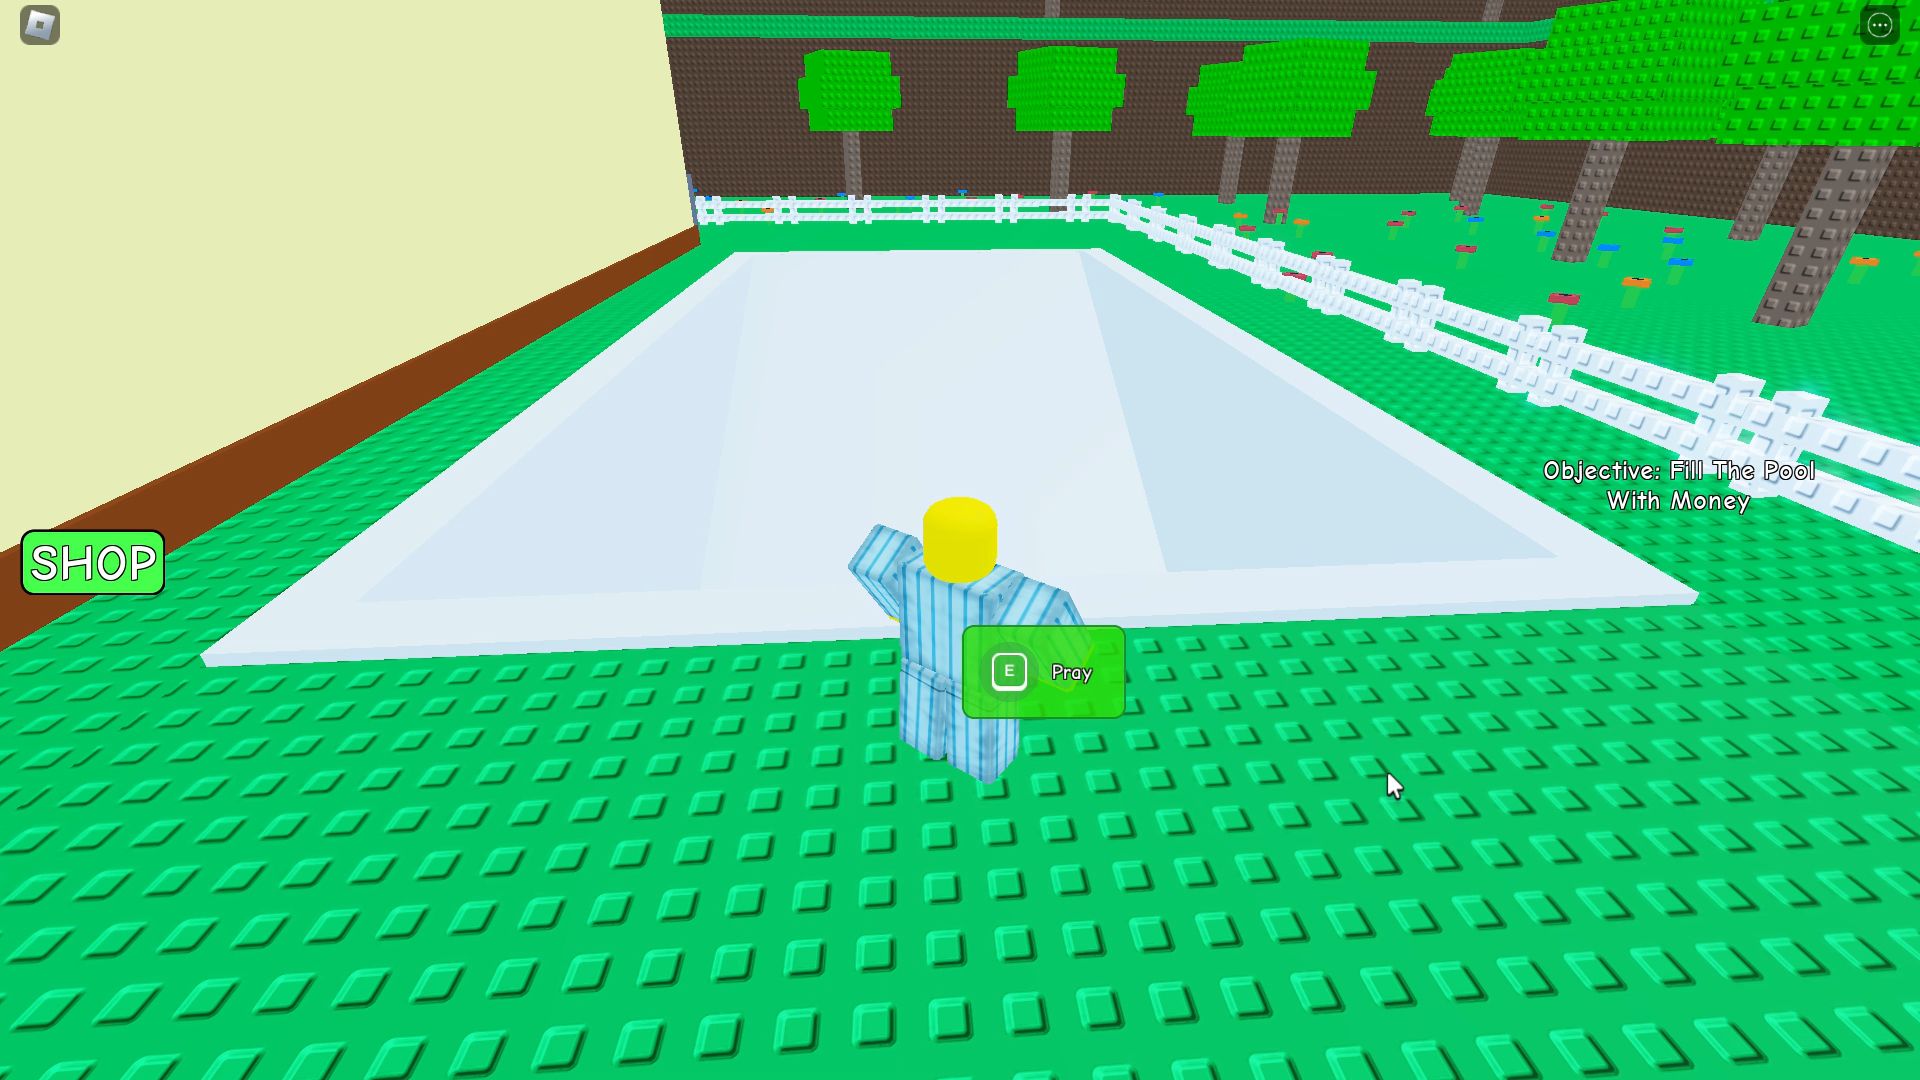 Roblox Need More Money - Filling the Pool